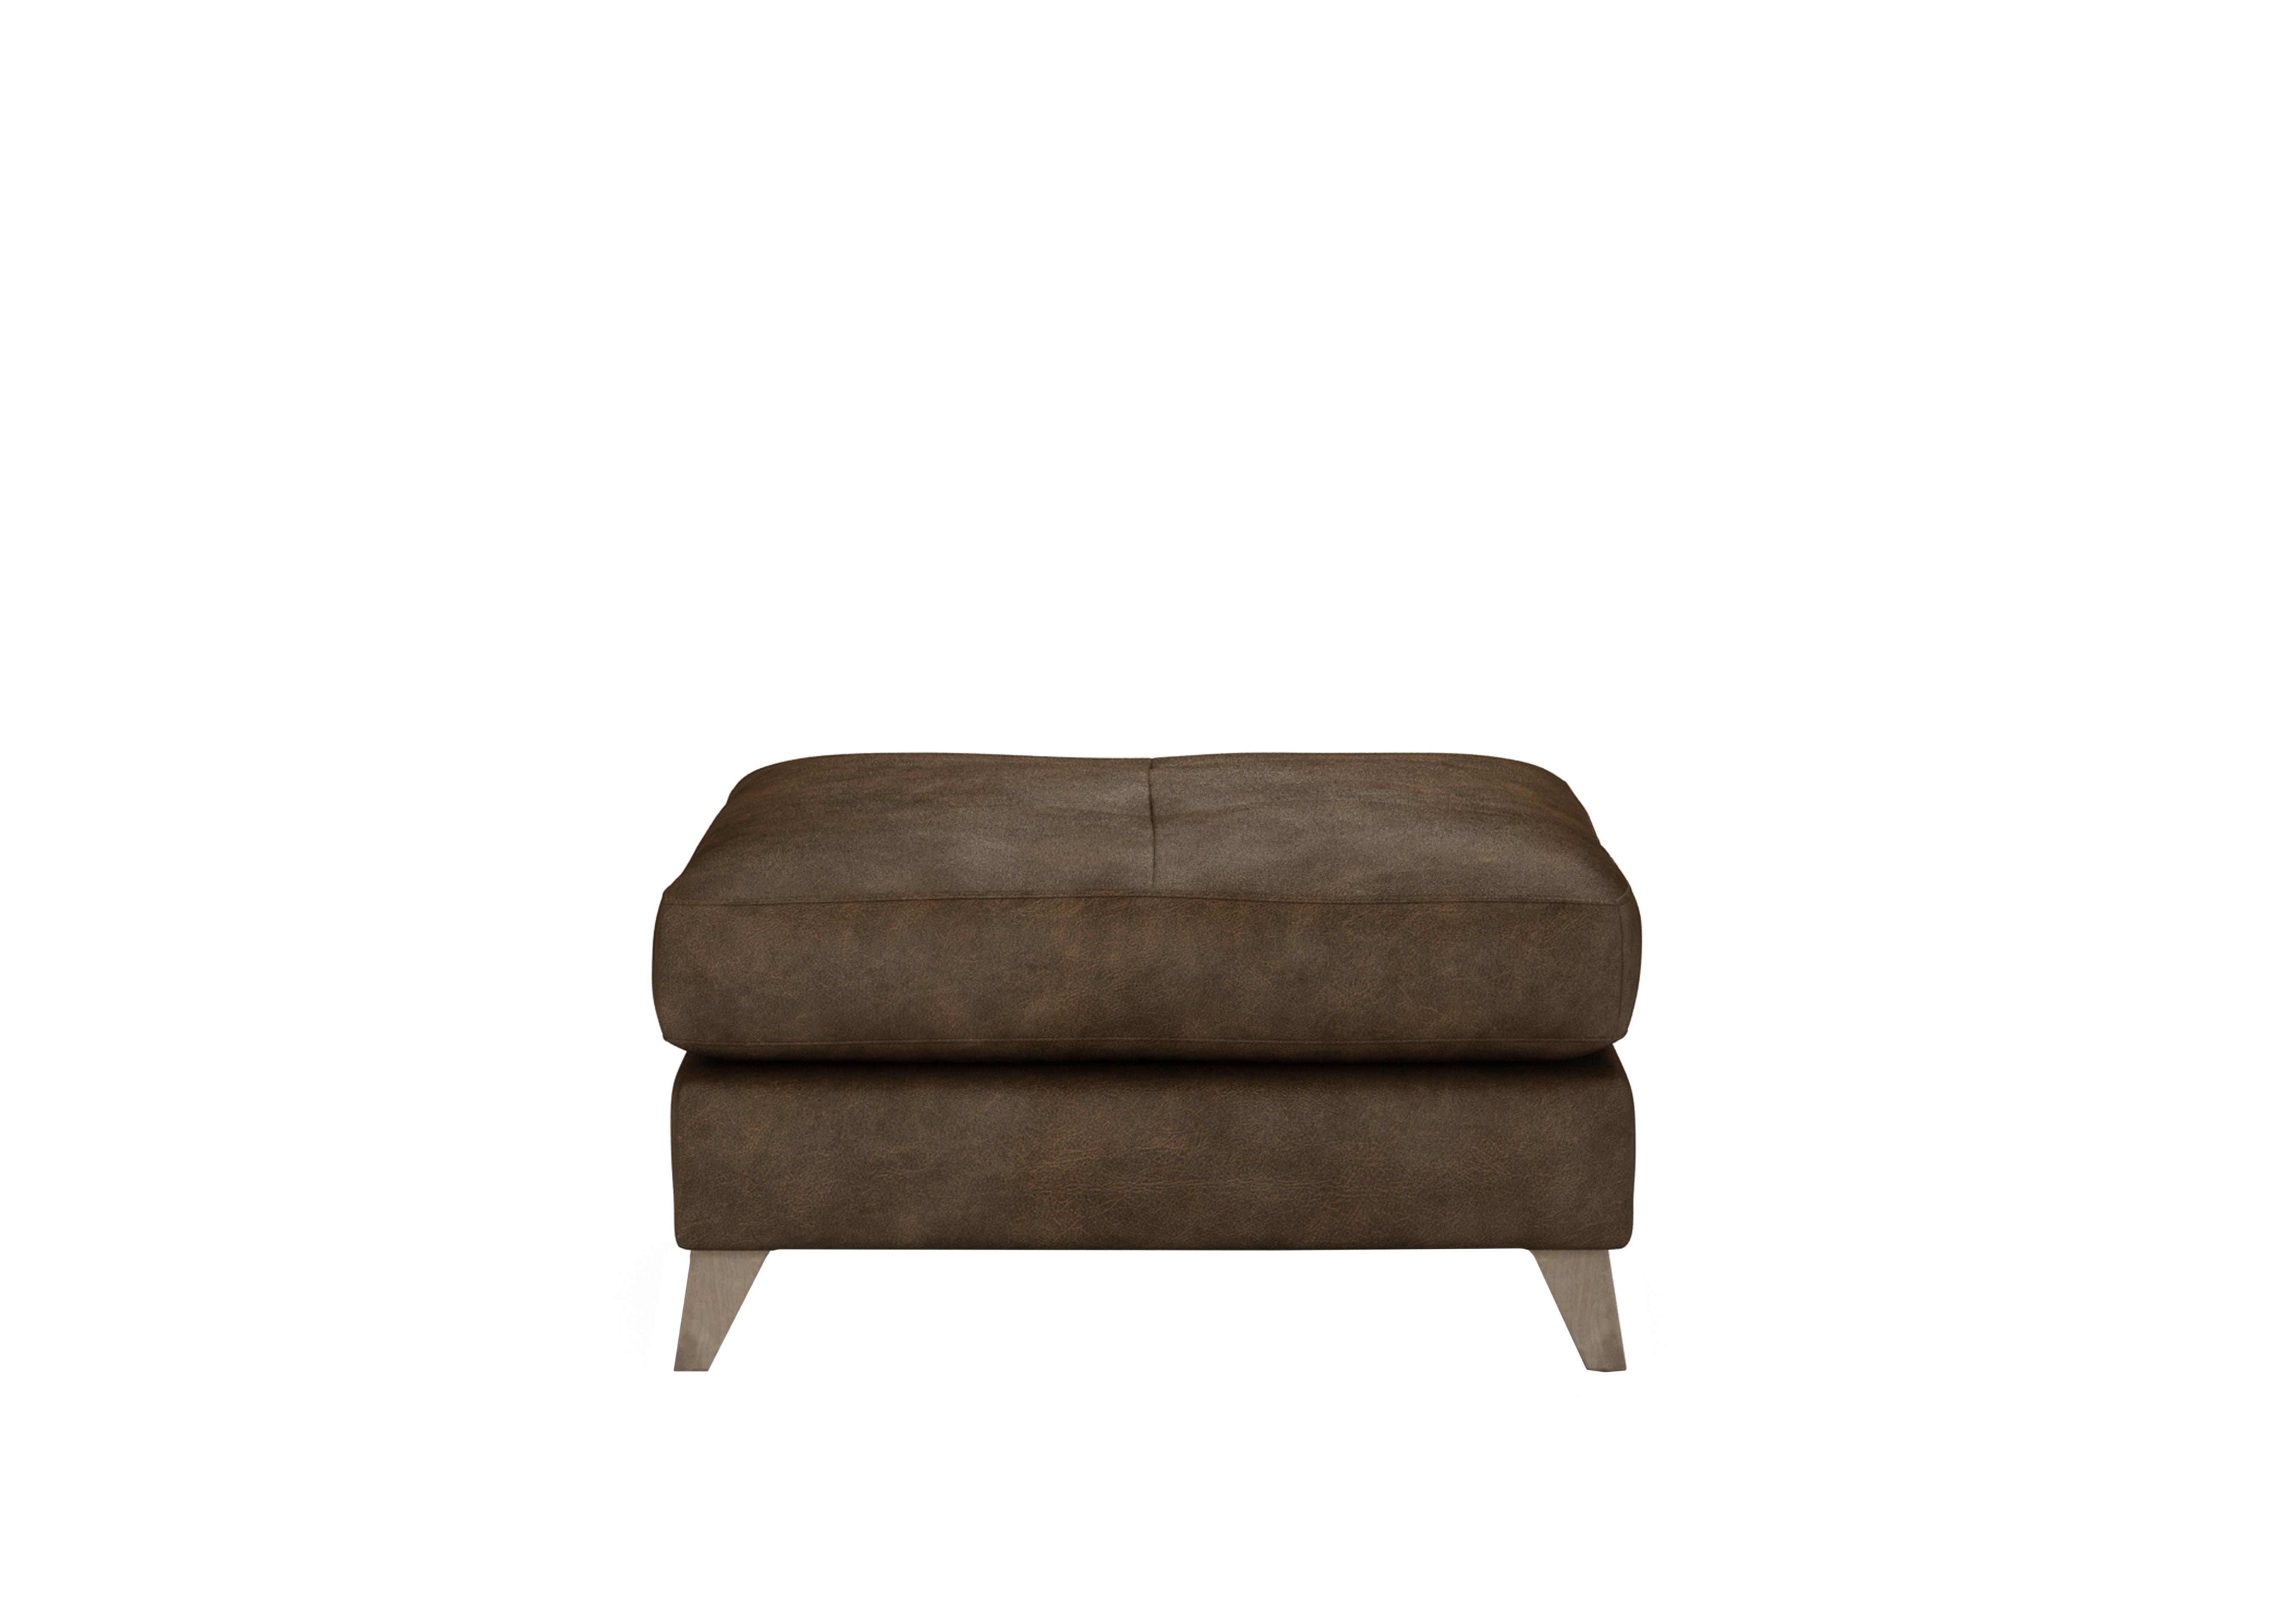 Hermione Leather Footstool in Bou192 Bourbon Wo Ft on Furniture Village